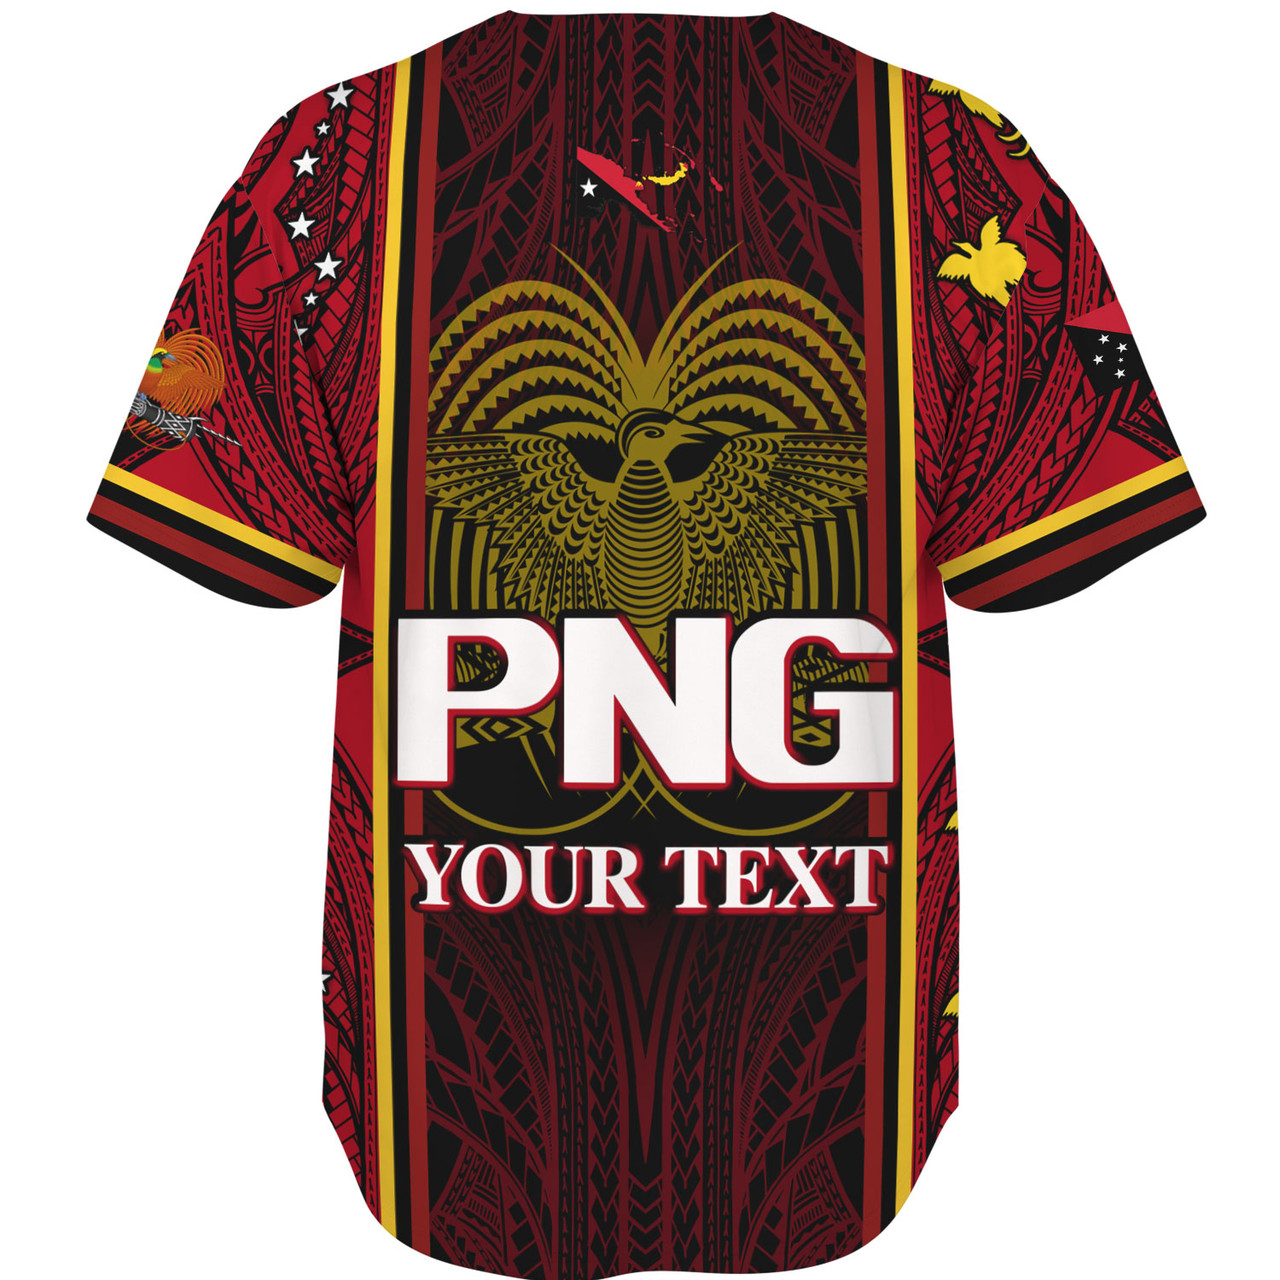 Papua New Guinea Custom Personalised Baseball Shirt  Seal And Map Tribal Traditional Patterns